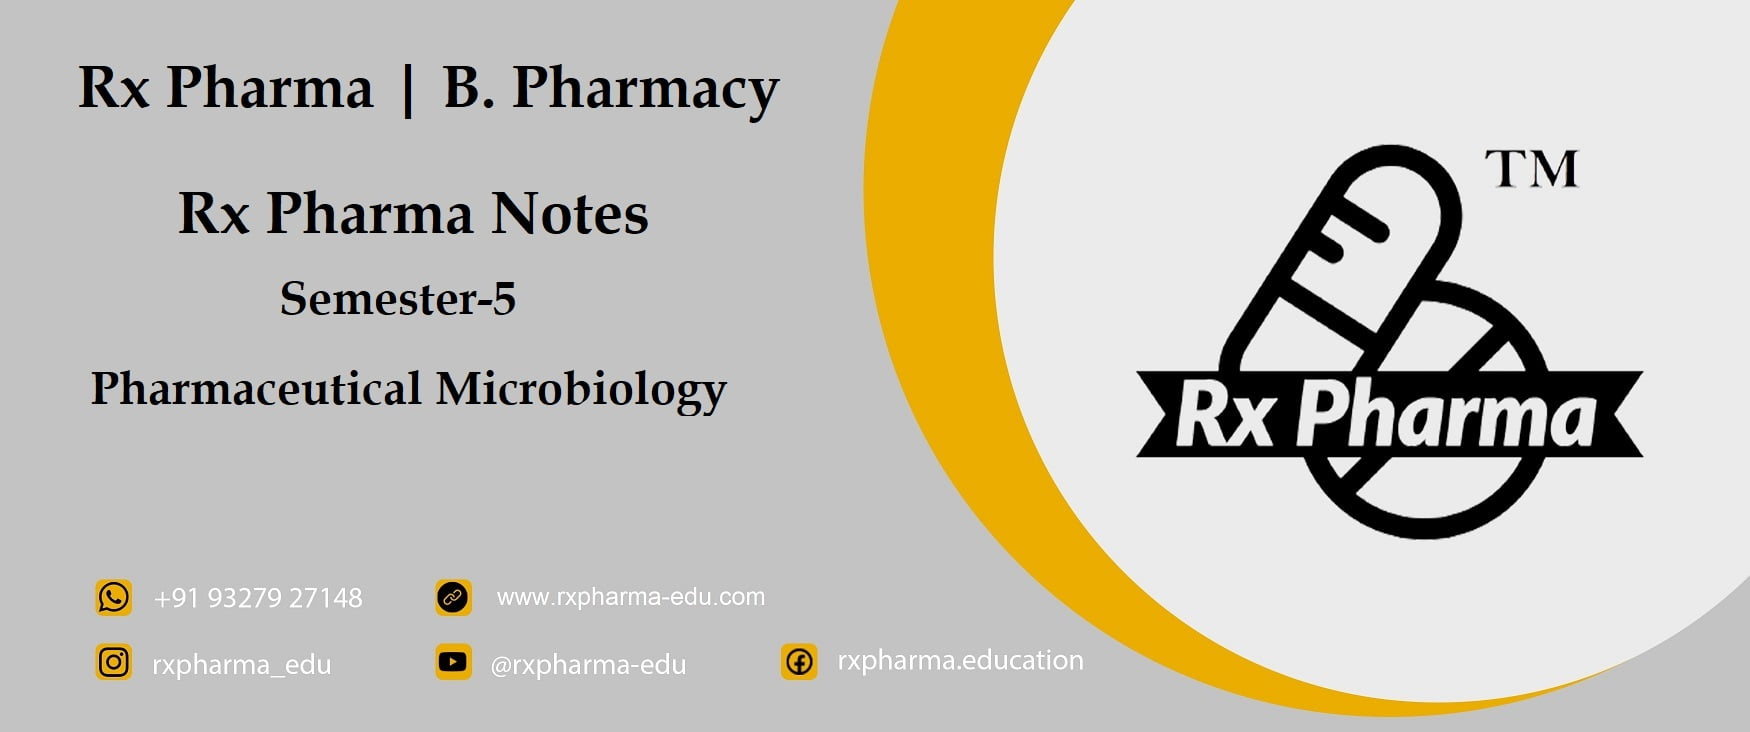 Pharmaceutical Microbiology Notes Banner